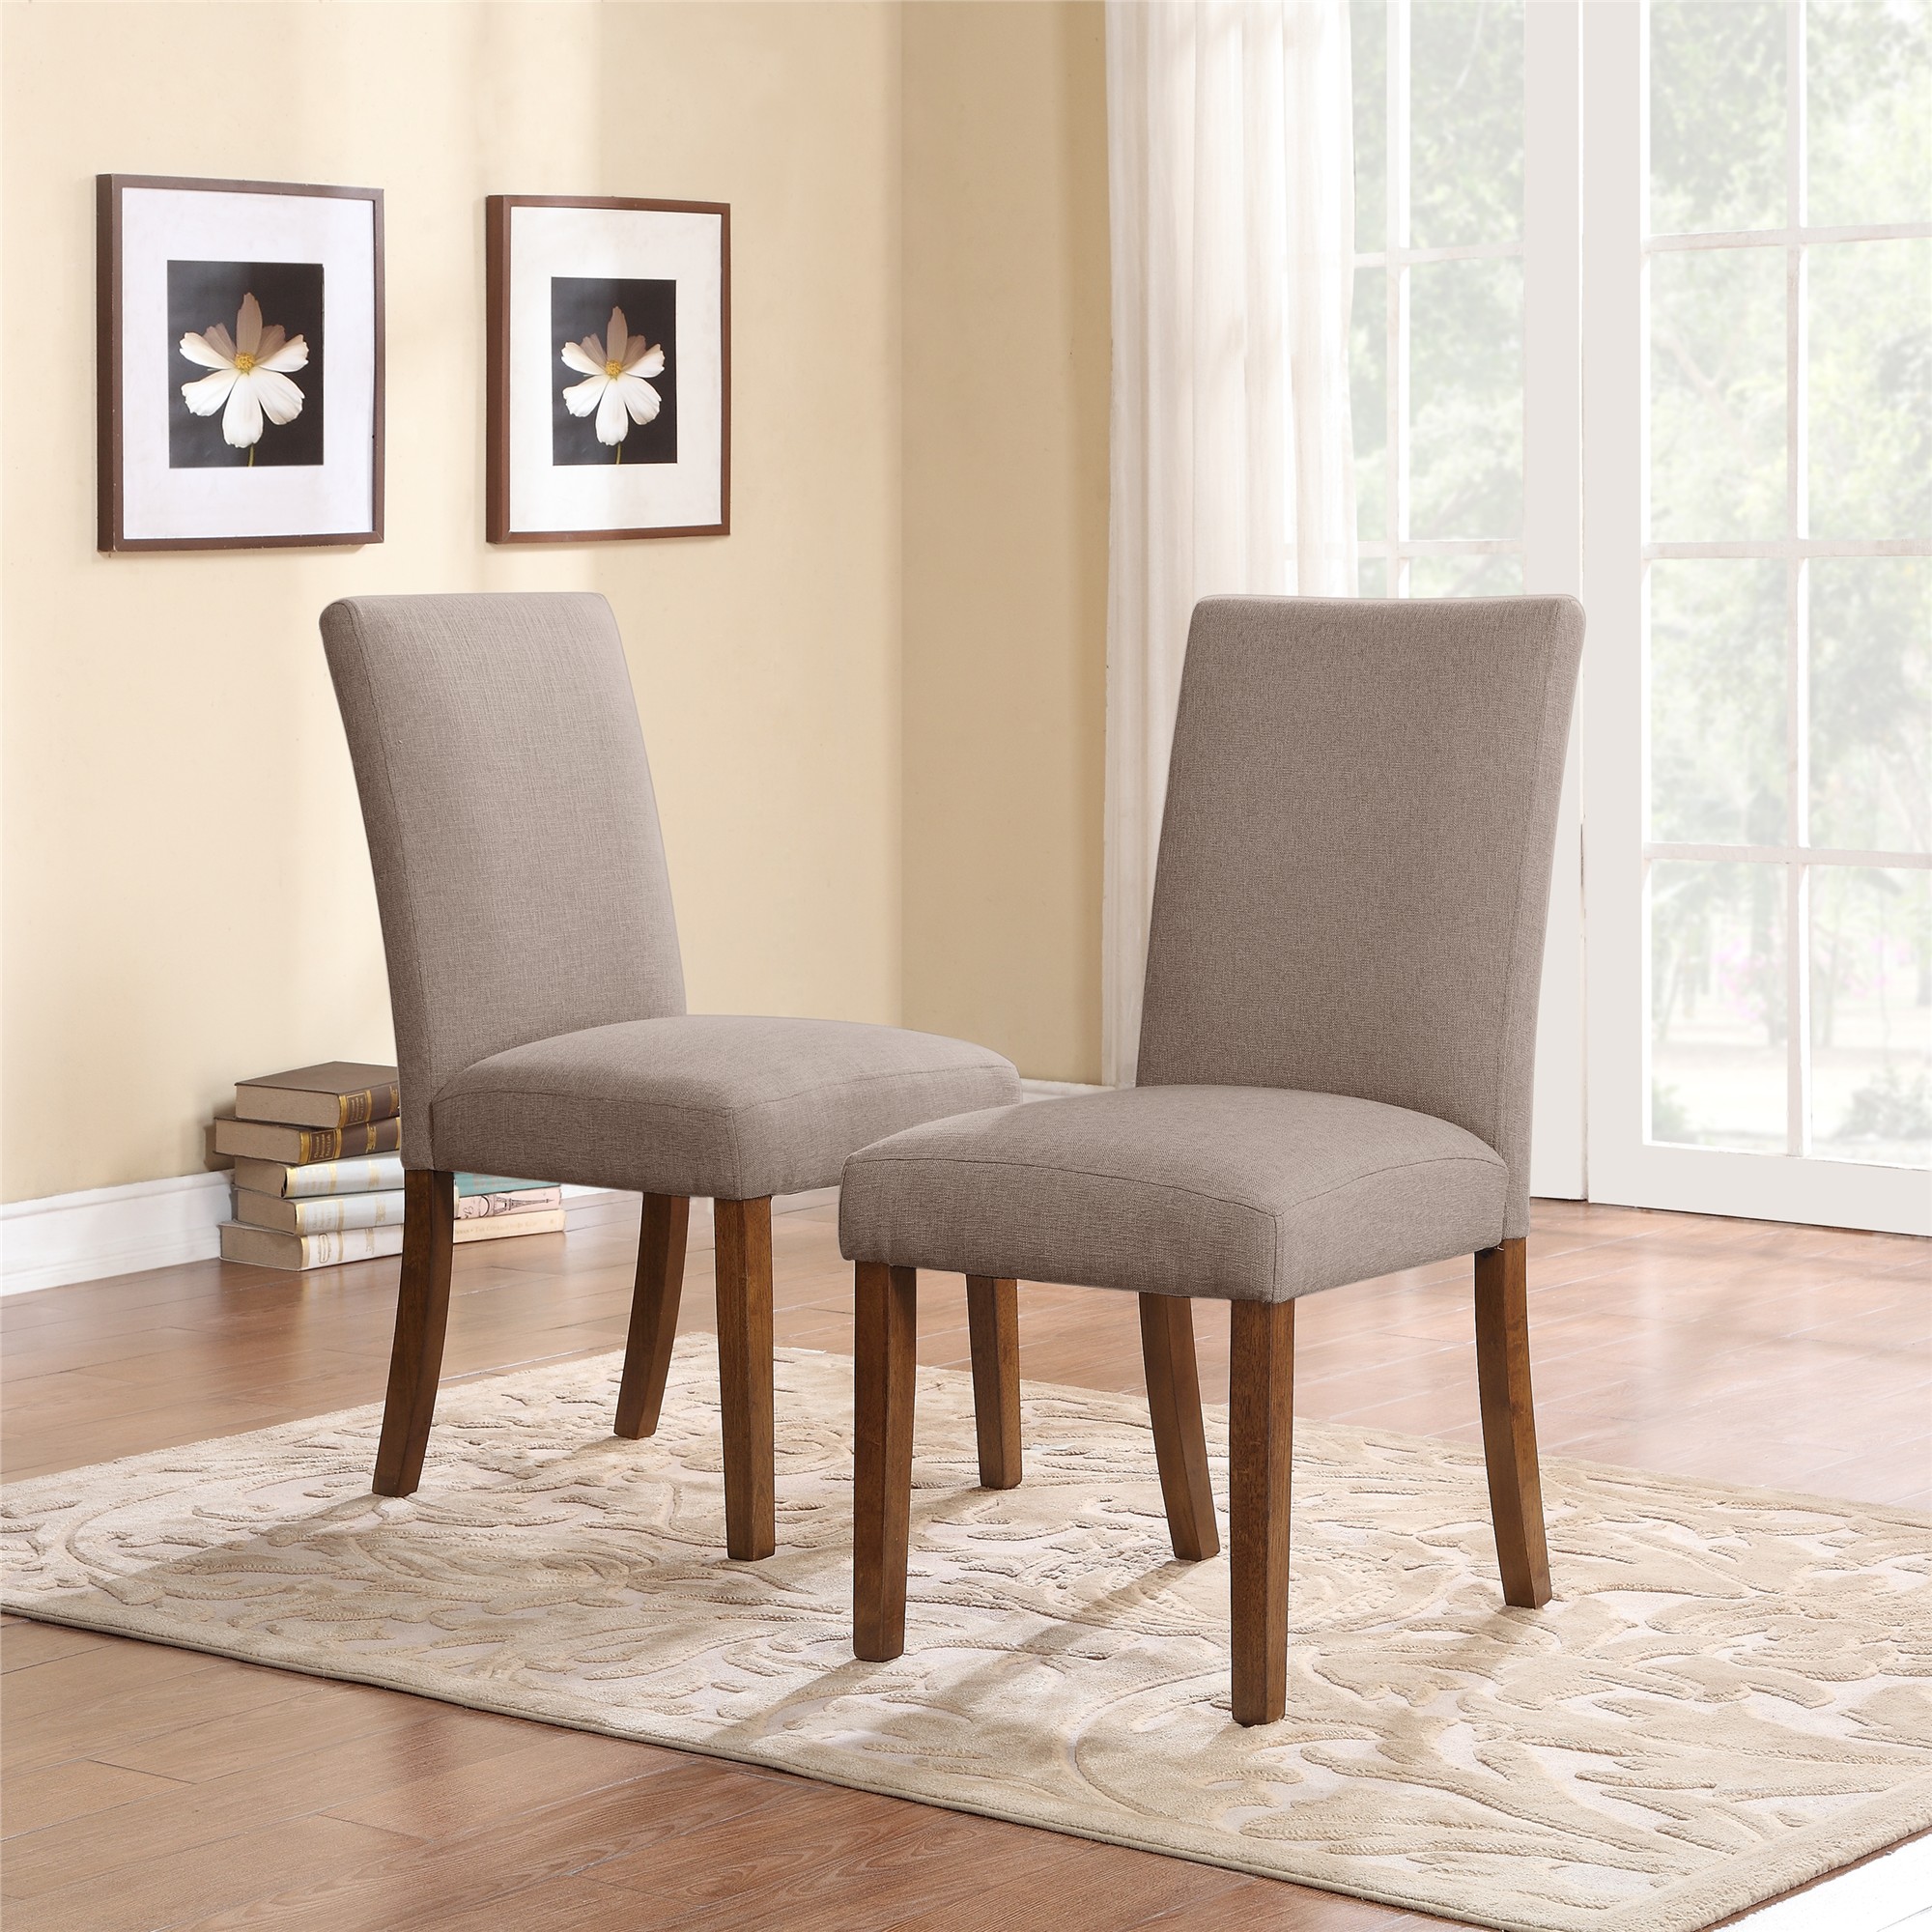 Trestle 5-Piece Dining Set with Linen Parsons Chairs, Dark Pine/Taupe - image 3 of 3